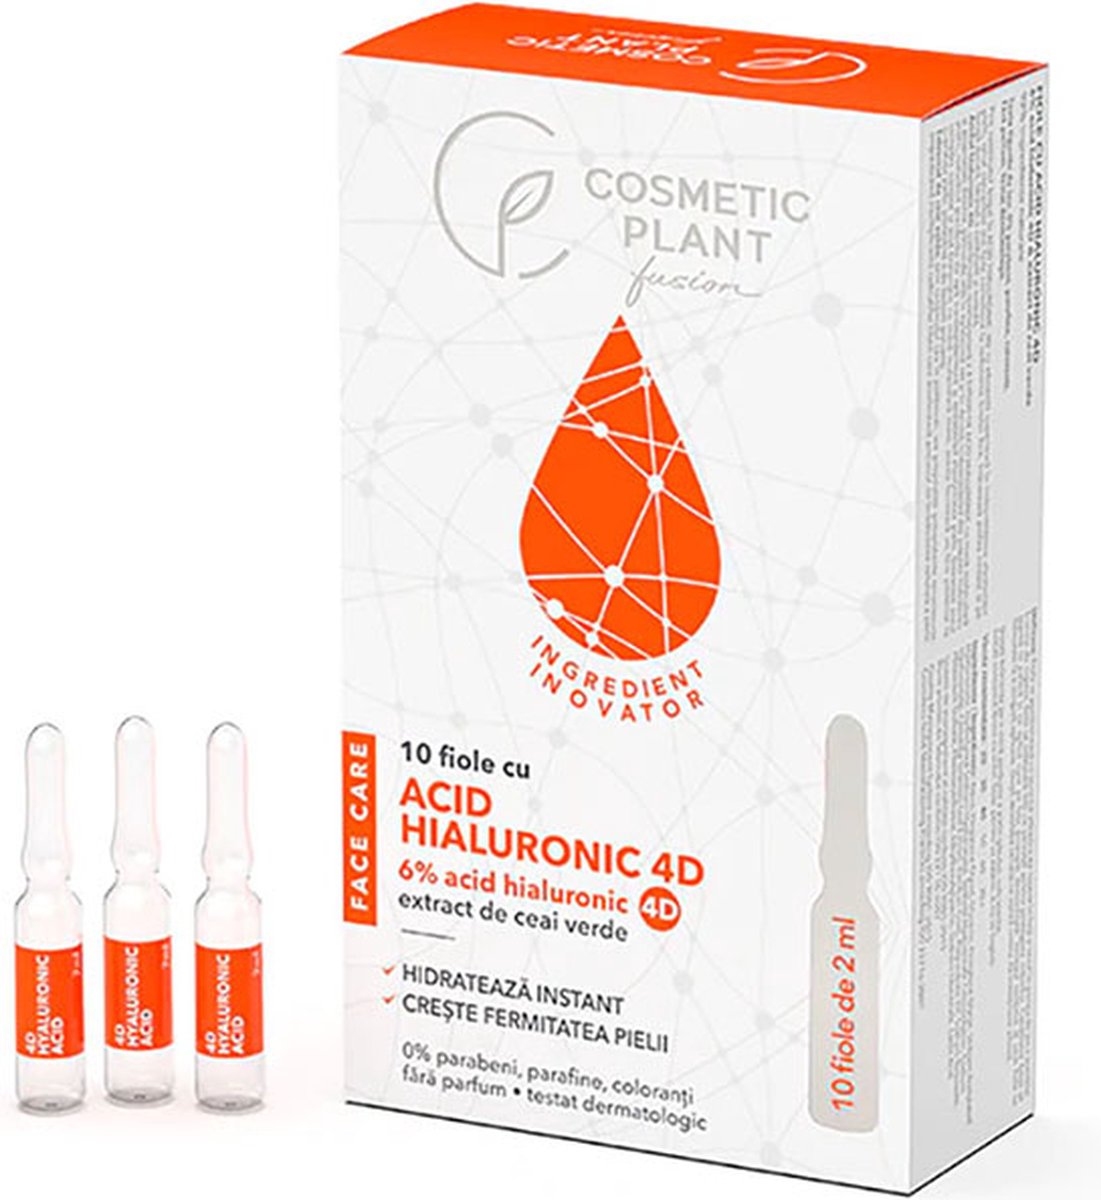 Cosmetic Plant Ampoules with 6% Hyaluronic Acid 4D with 4 types of Hyaluronic Acid and Green Tree Extract, 92% natural ingredients